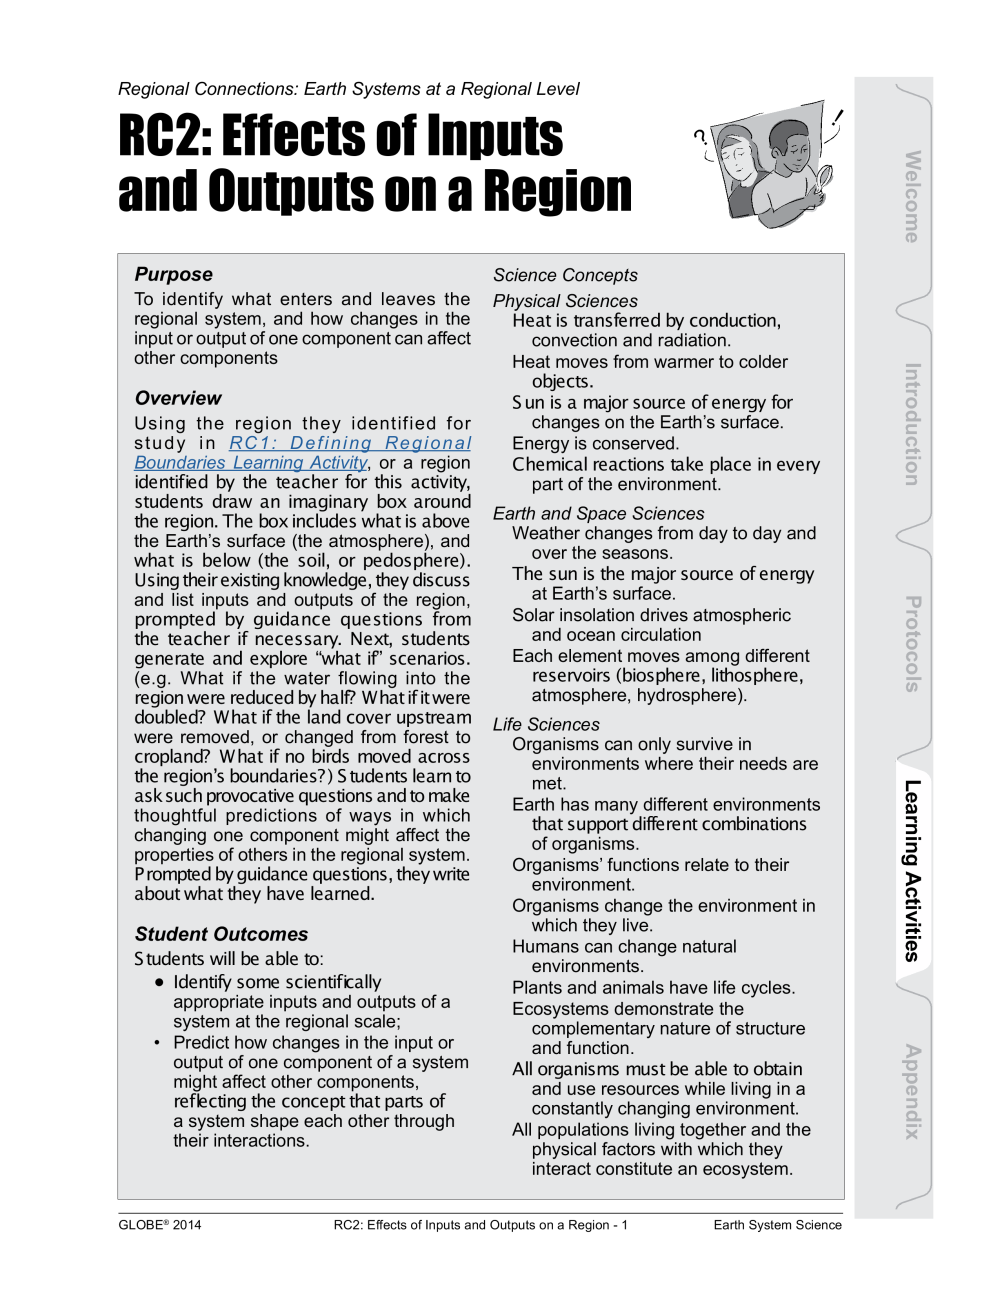 Learning Activities preview for Regional Connections- earth systems at a Regional Level RC2- Effects of Inputs and Outputs on a Region